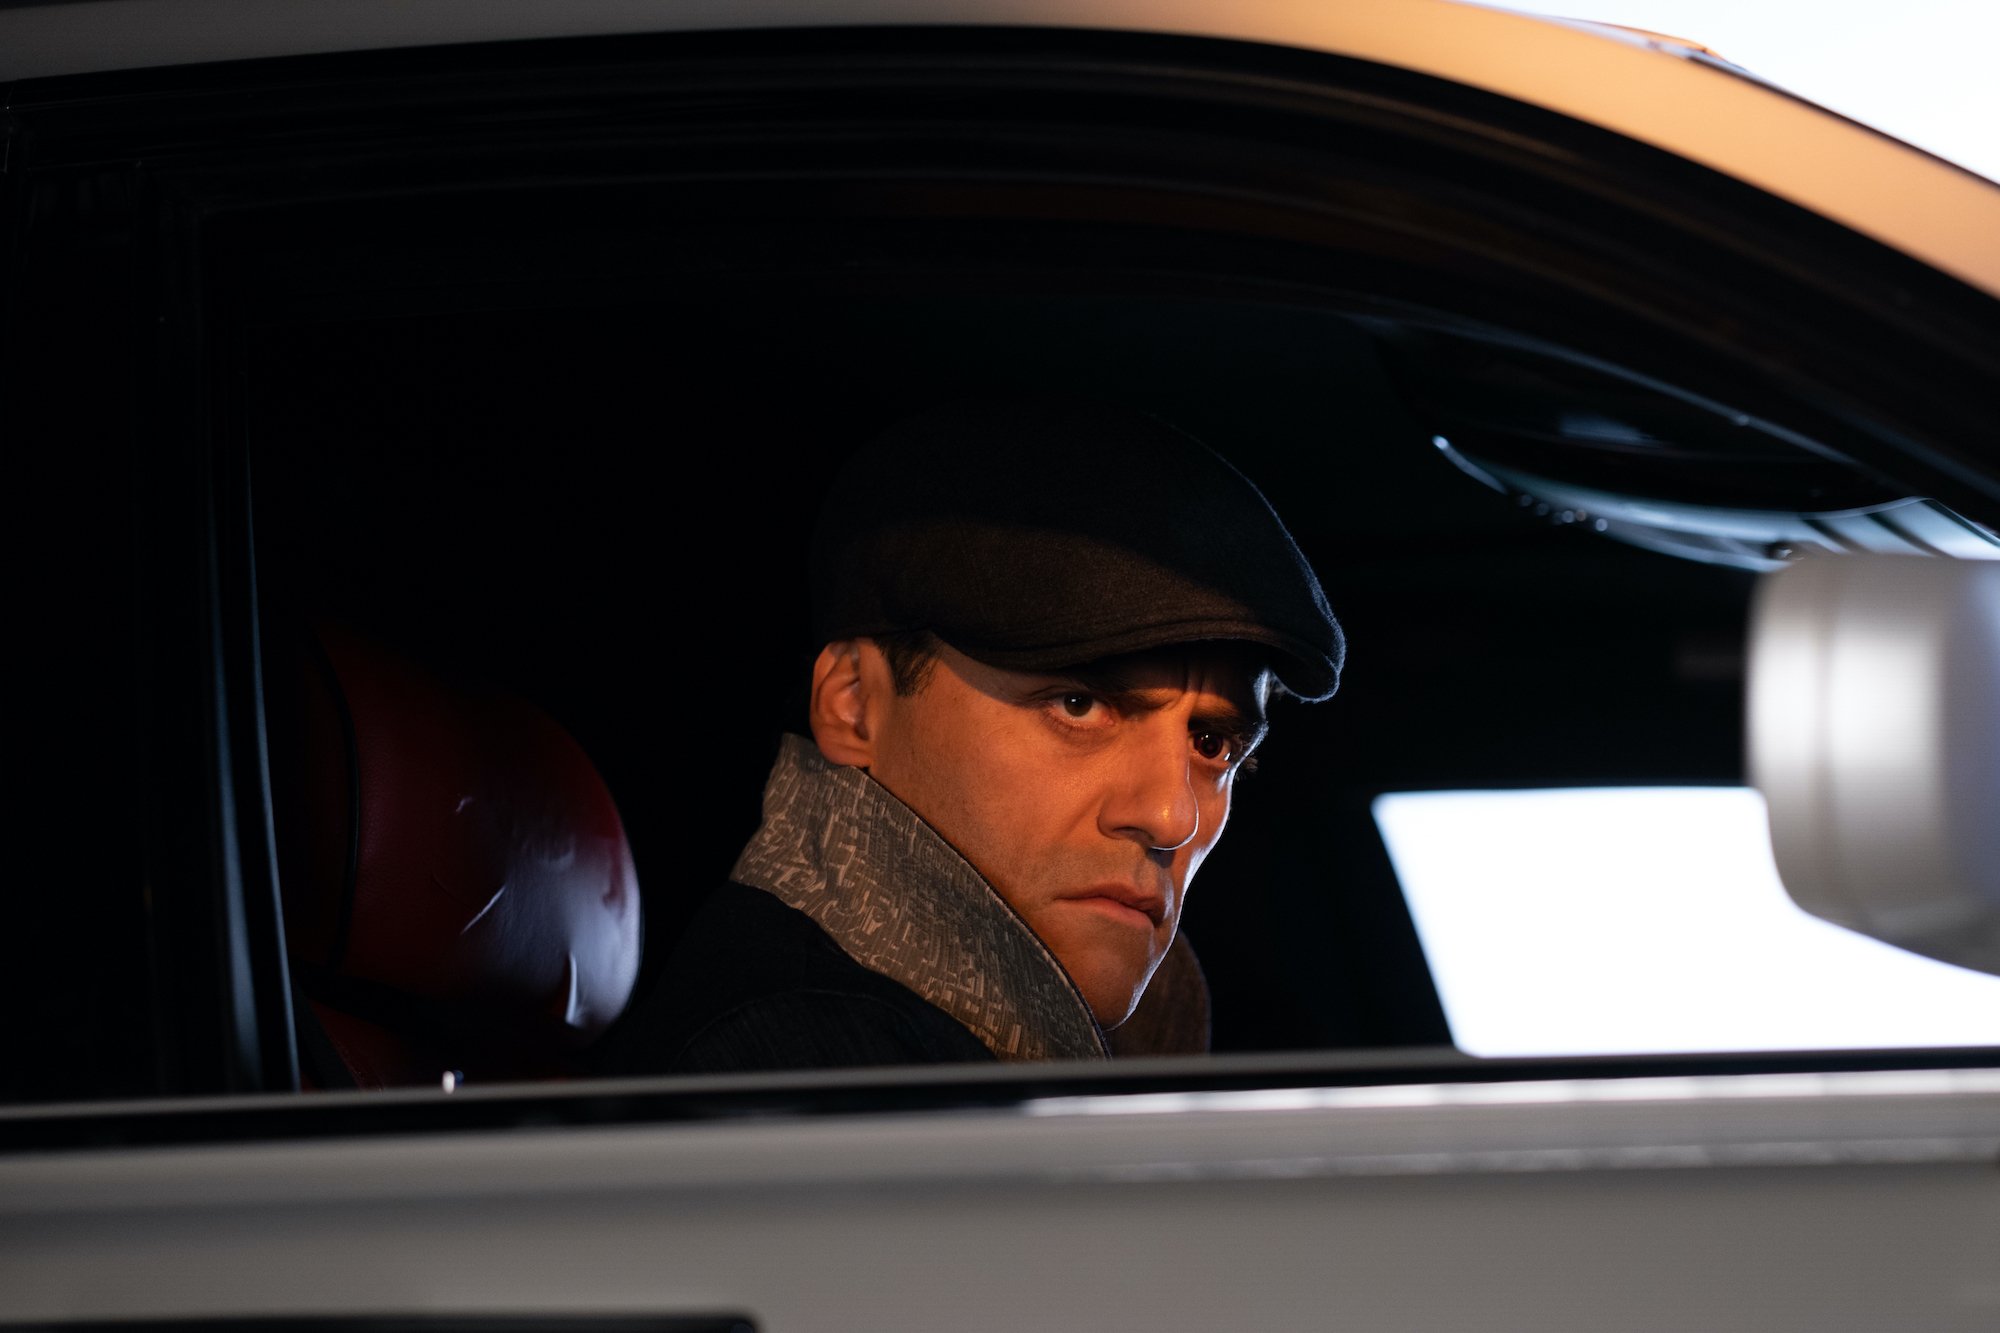 Oscar Isaac as Jake Lockley in the 'Moon Knight' finale on Disney+. He's sitting in a car and wearing a flat cap.